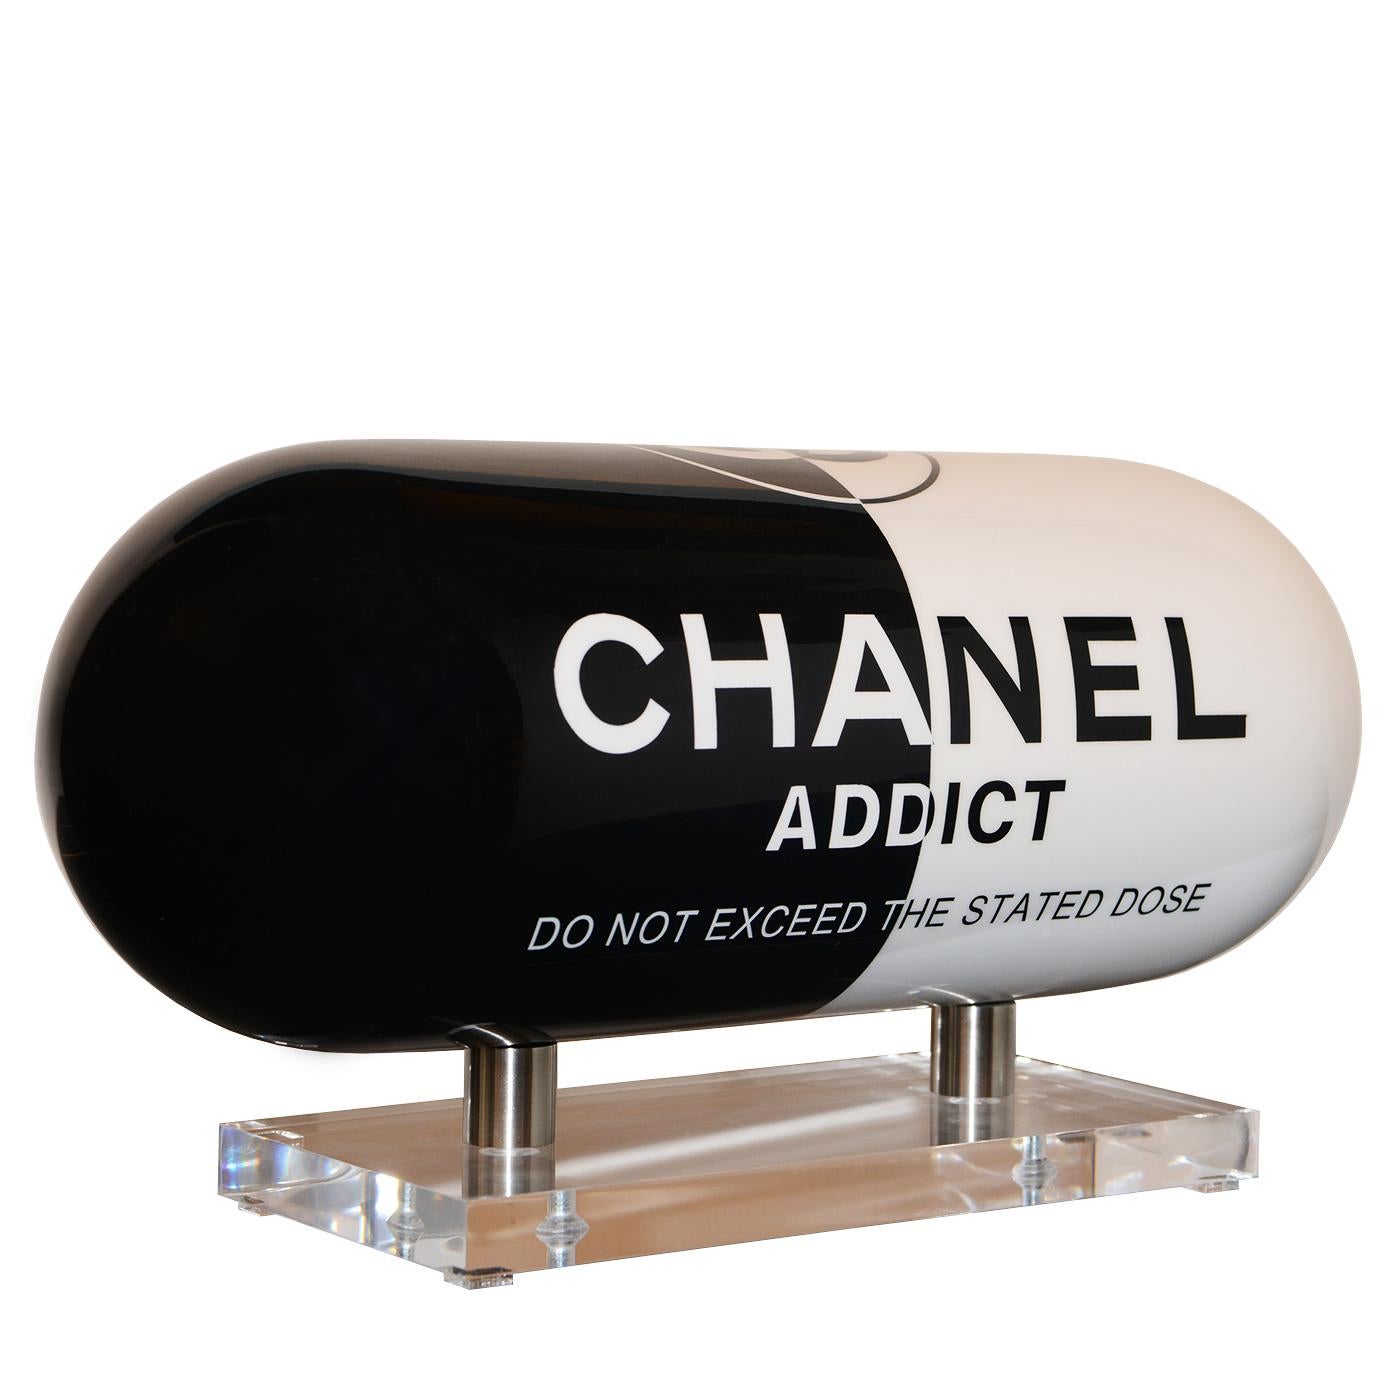 French Chanel Addict Black & White Pill Sculpture For Sale